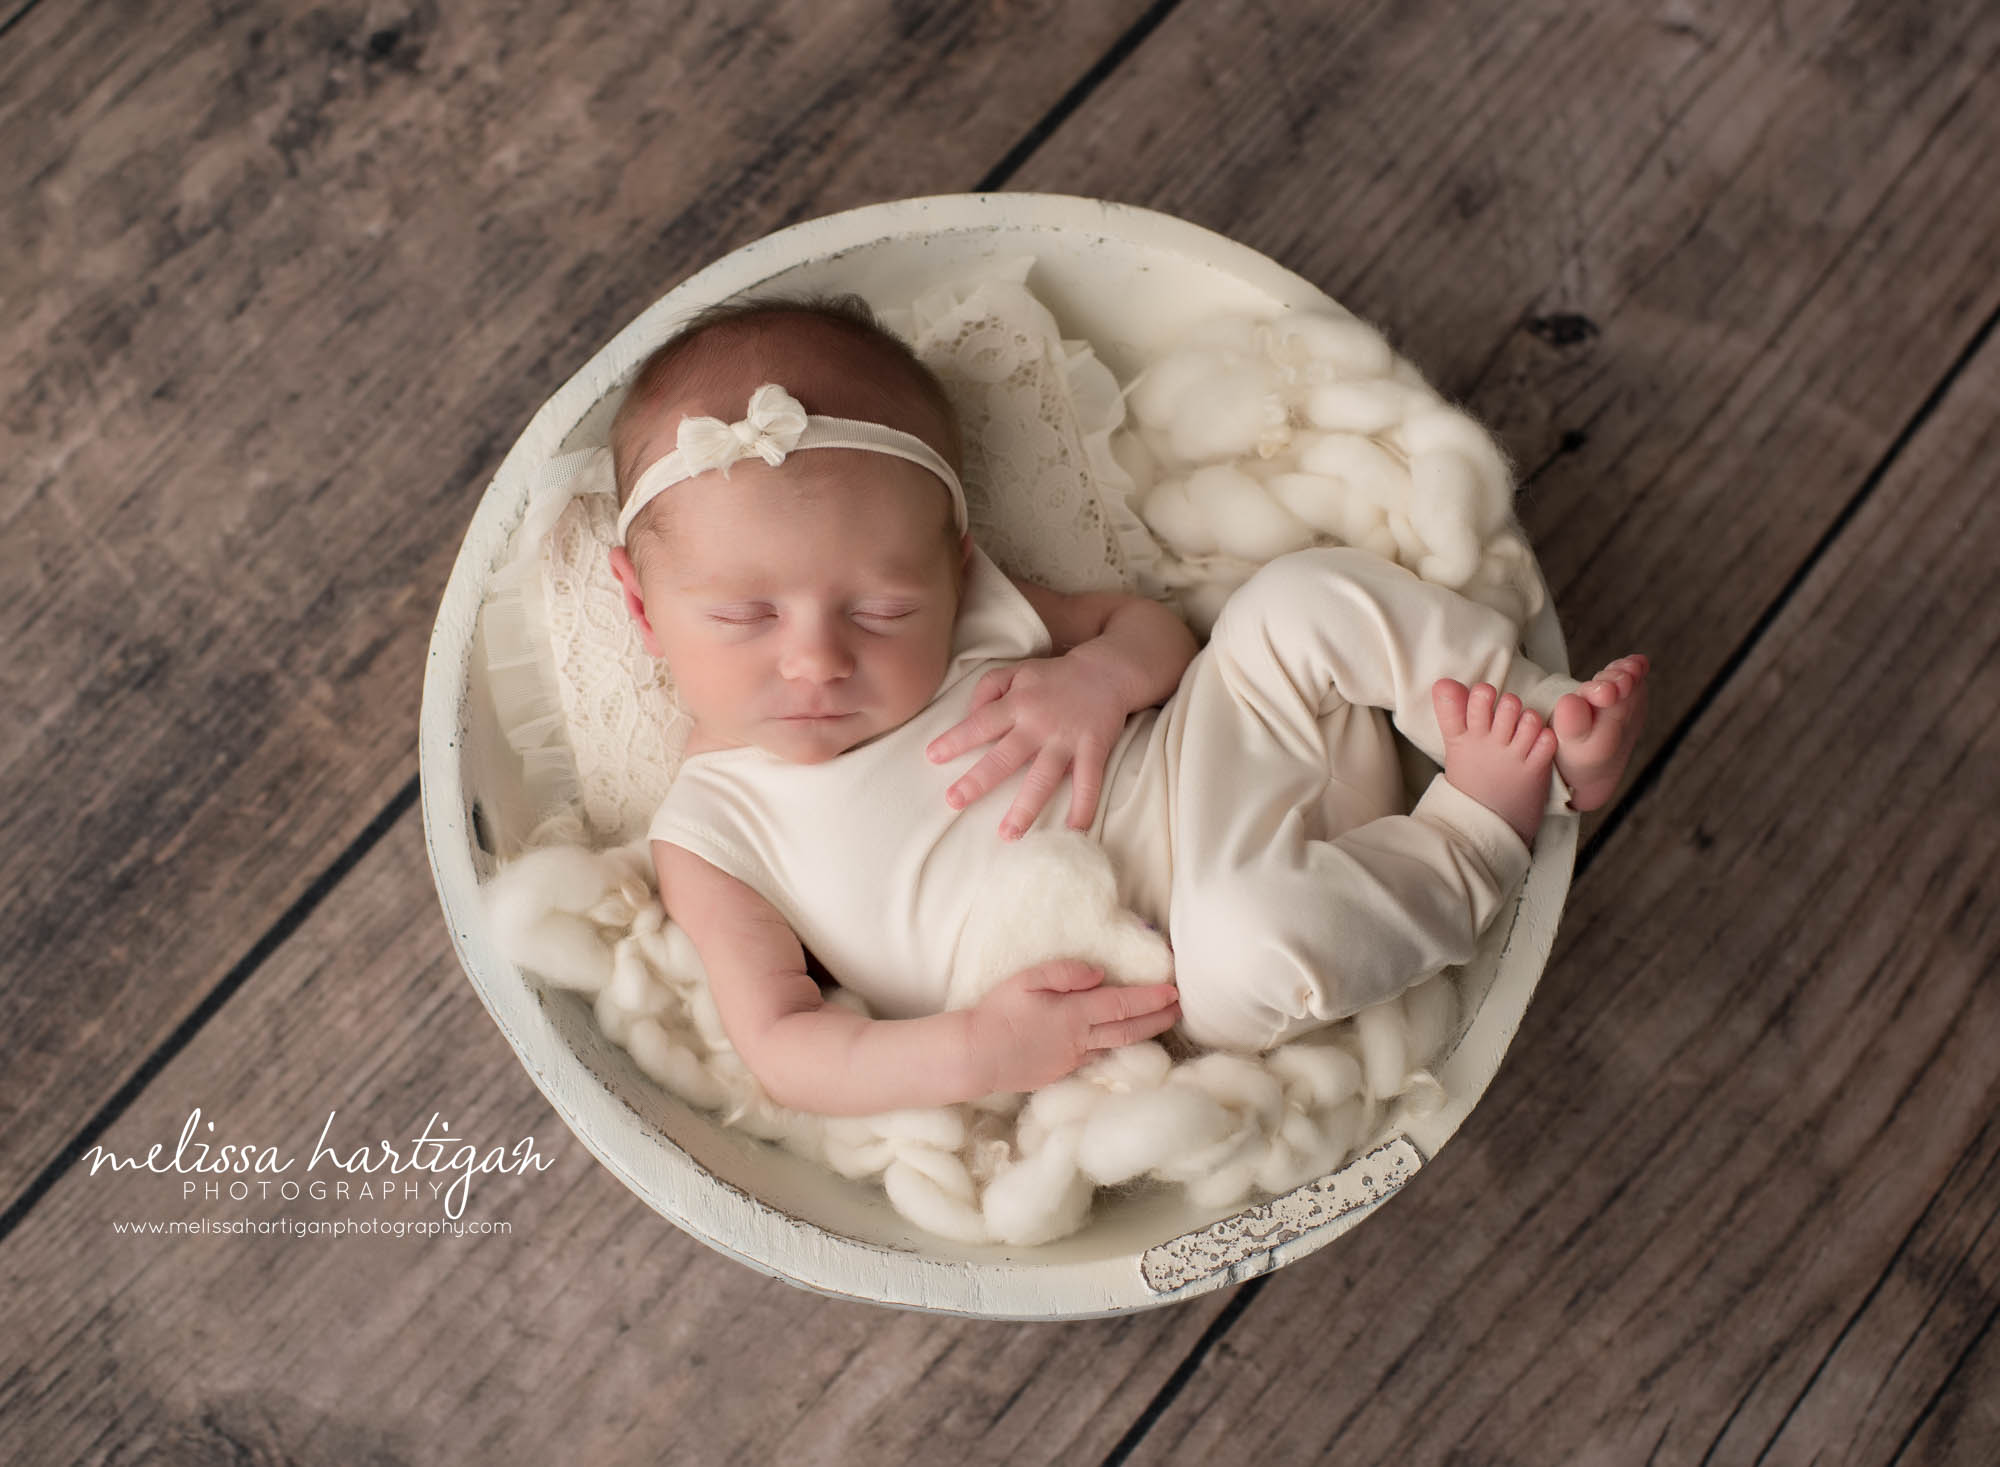 newborn baby girl wearing cream outfit posed in cream wooden bowl with cream layering